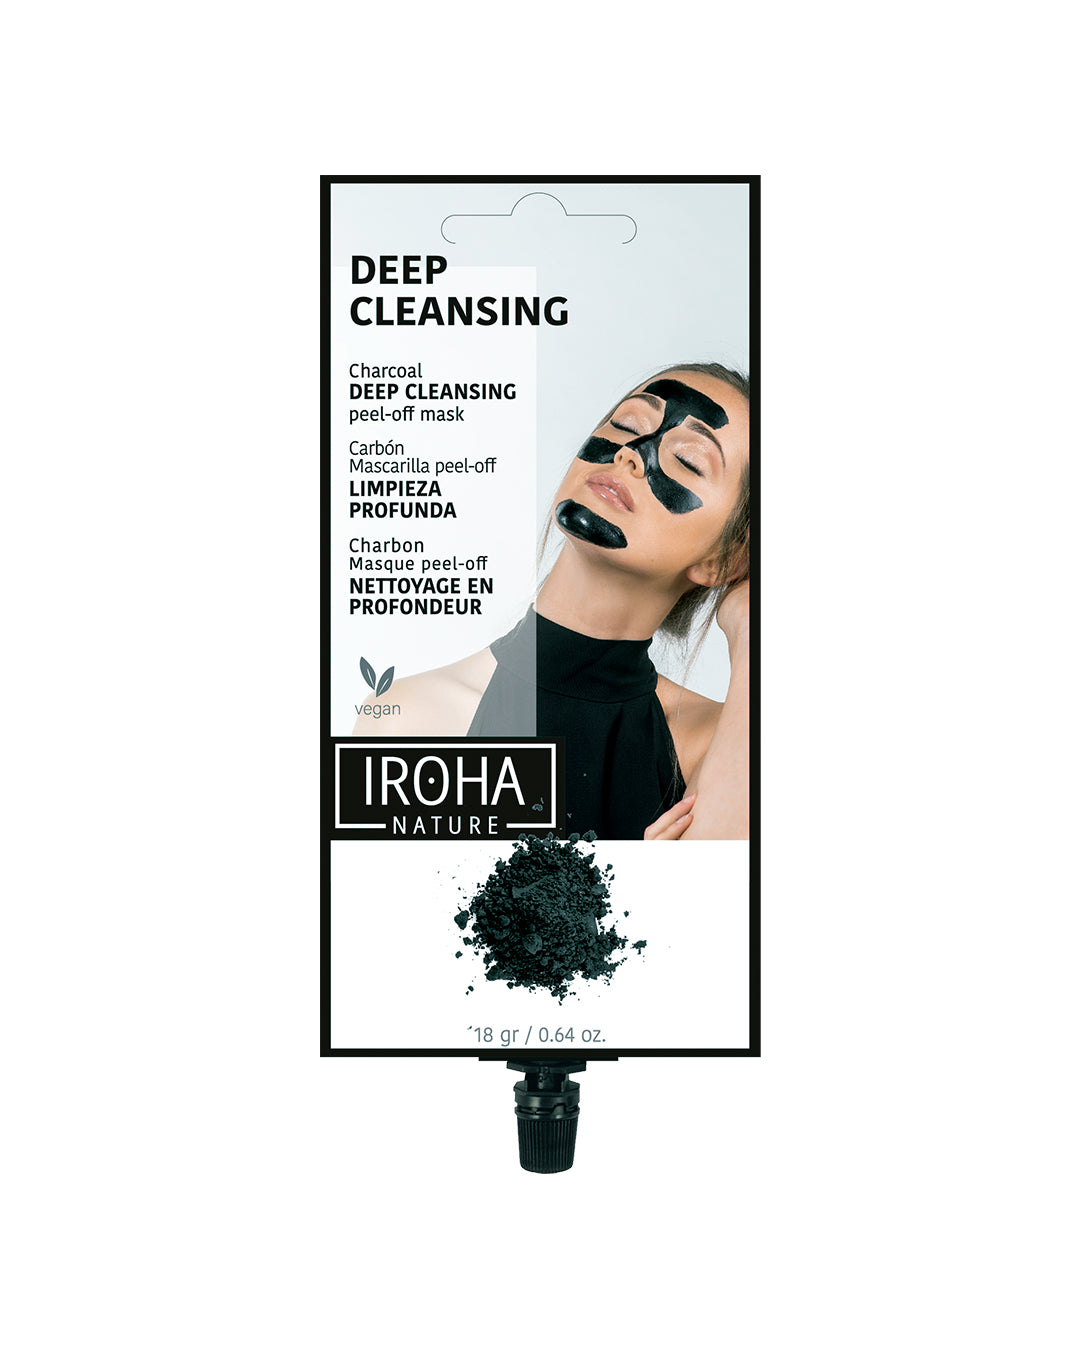 

"Iroha Nature Face Mask Peel-Off Deep Cleansing with Activated Charcoal 18 g"